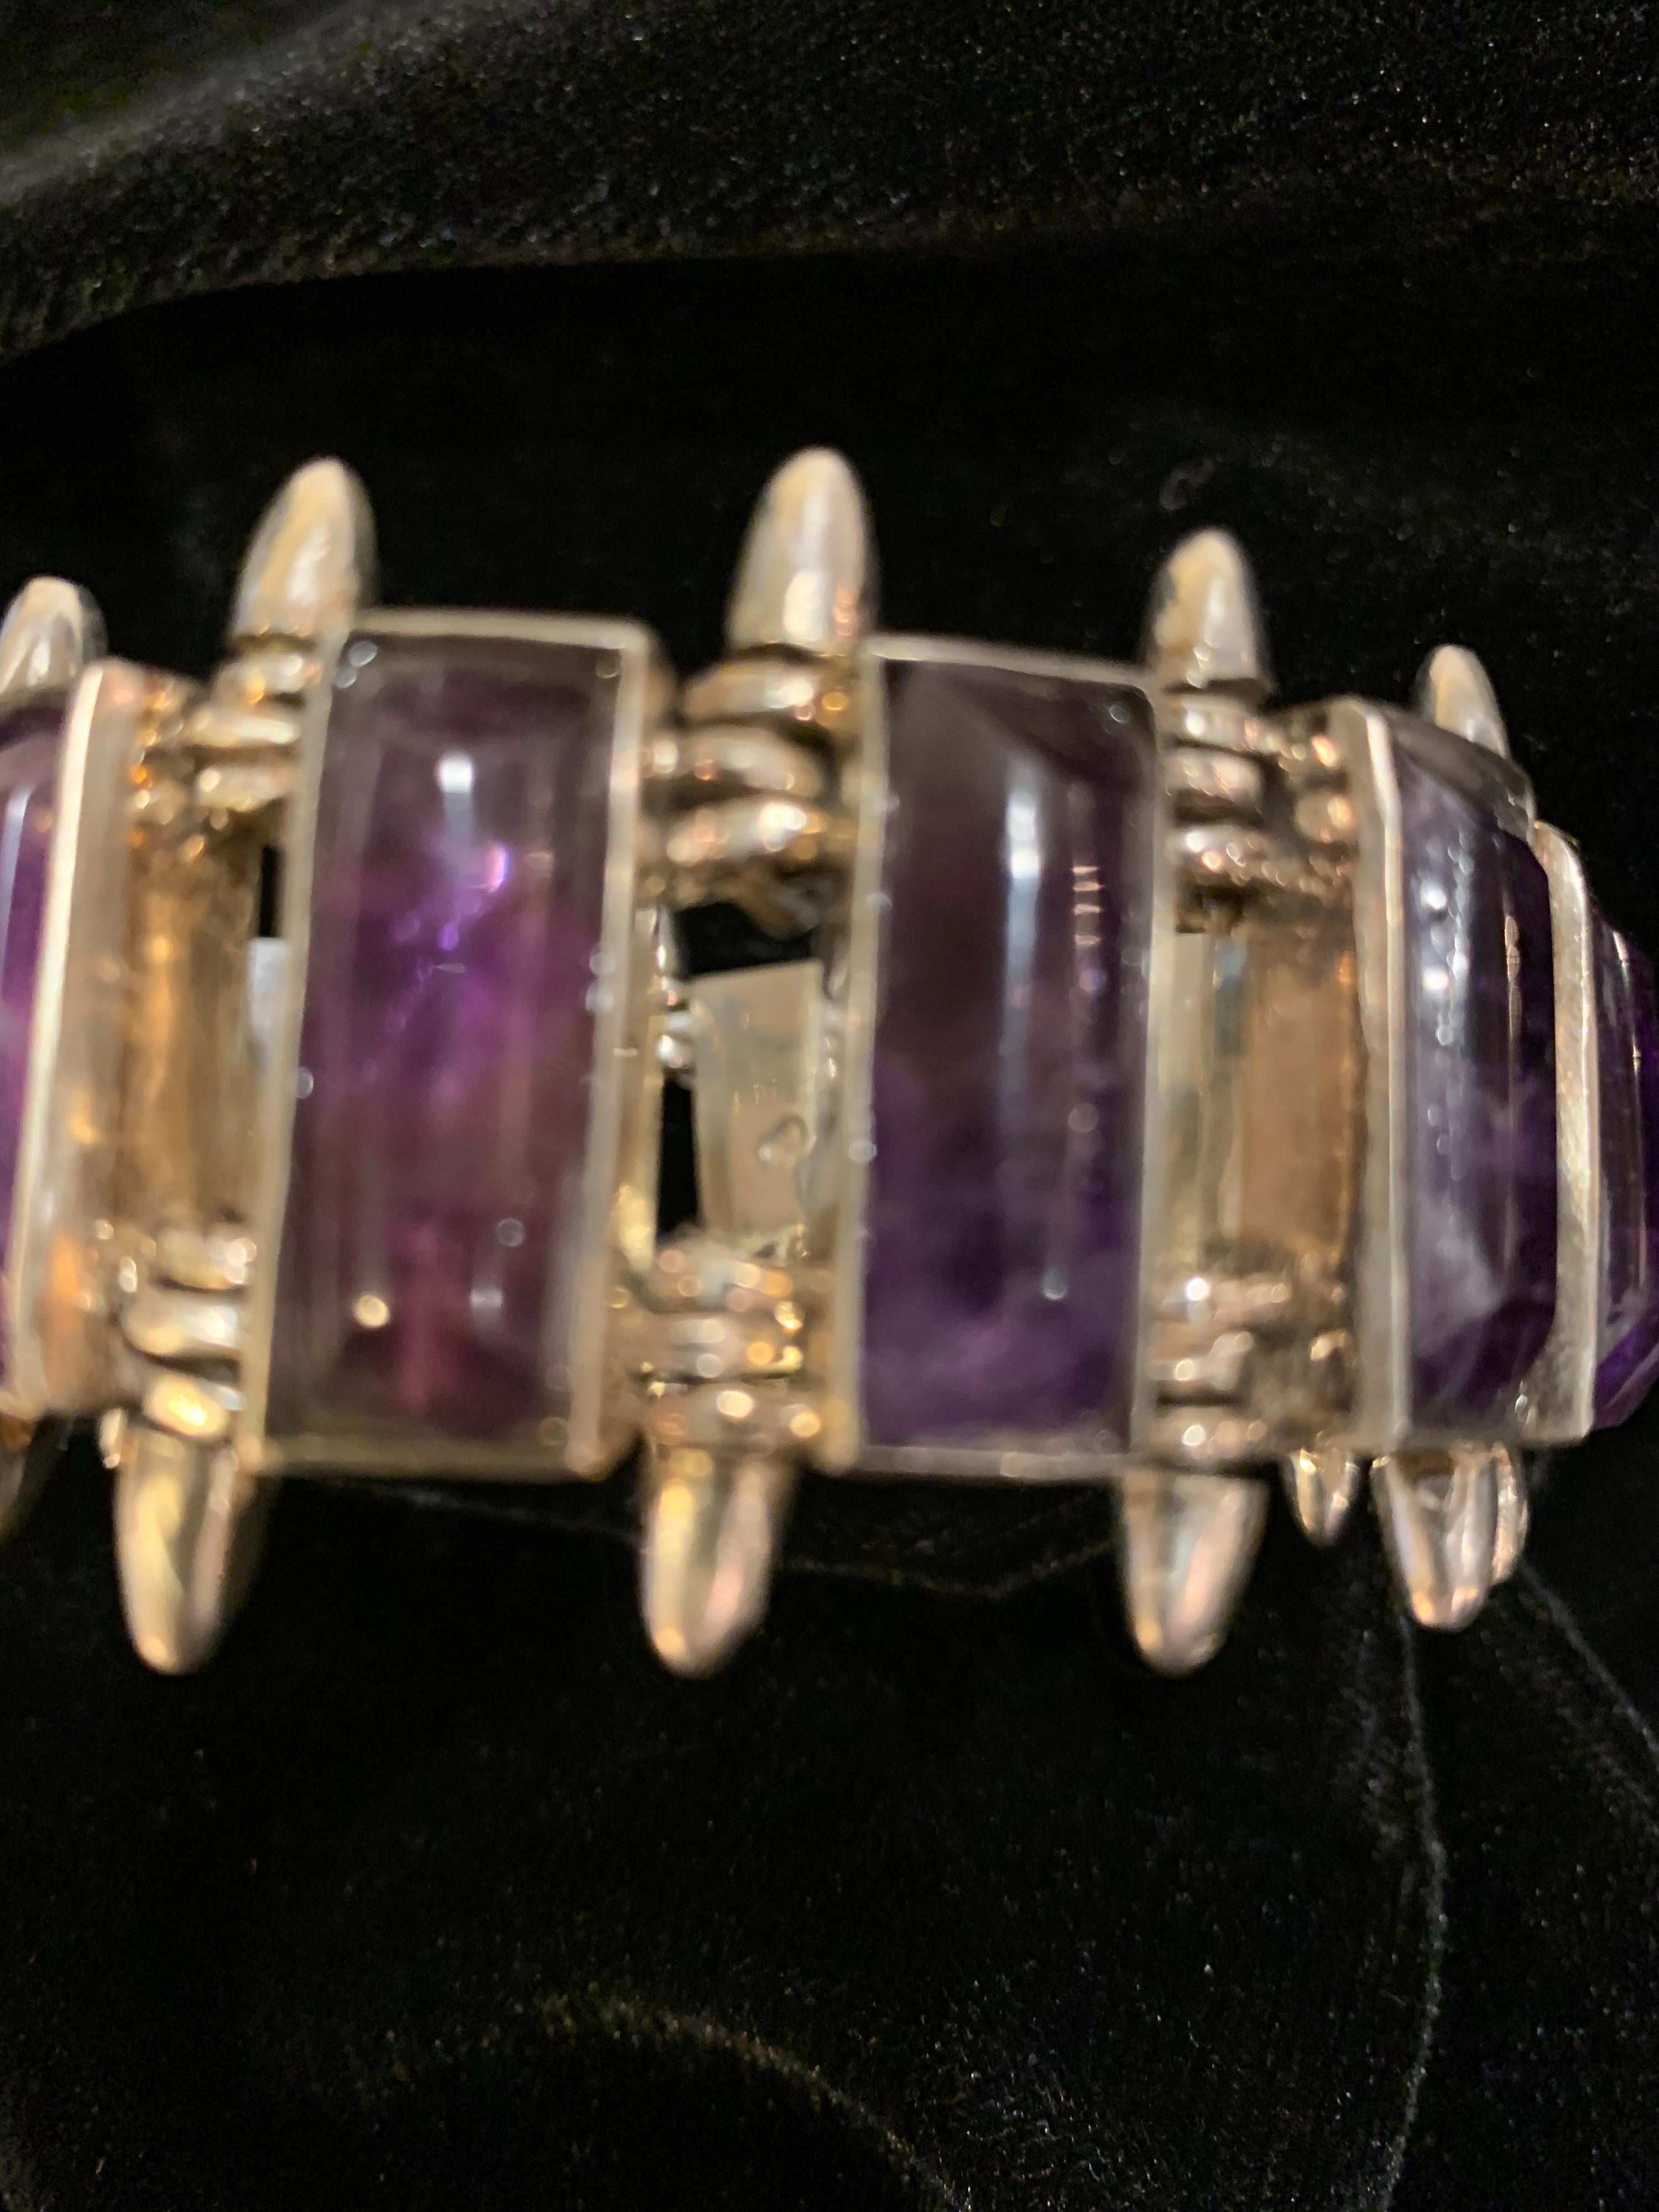 Striking and unusual bracelet by Antonio Pineda in sterling silver and Amethyst, circa 1960.